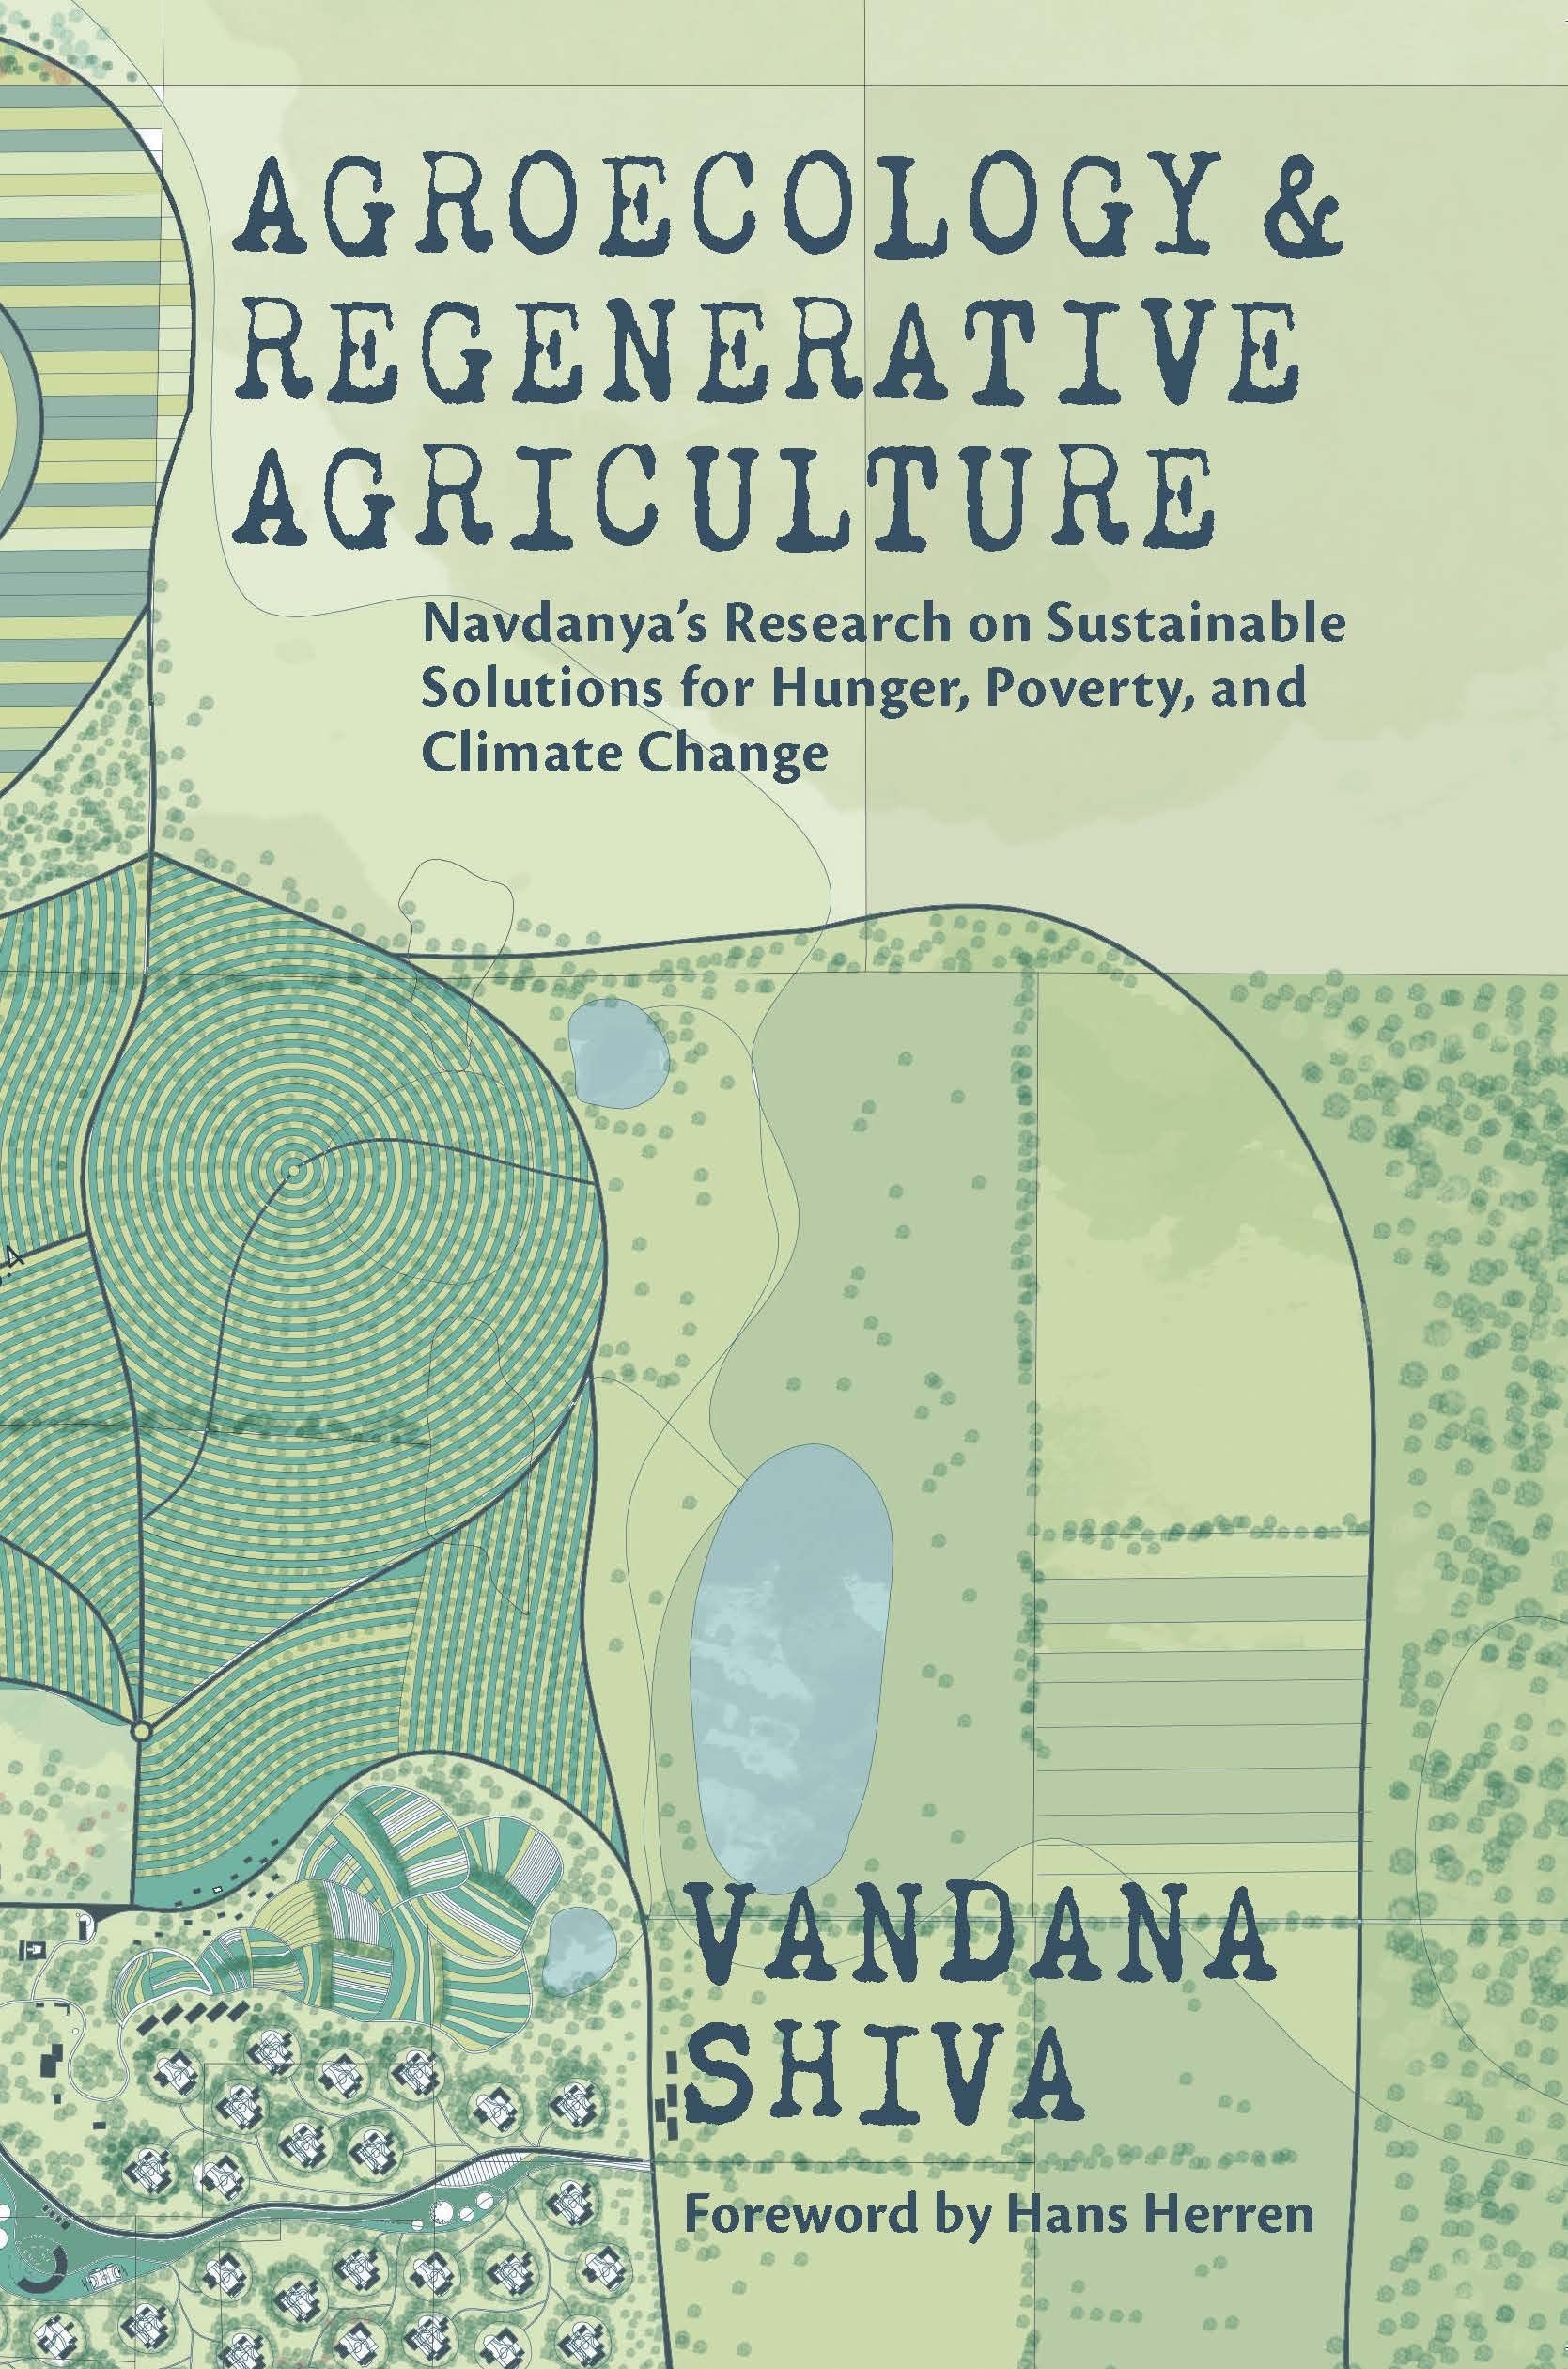 AGROECOLOGY AND REGENERATIVE AGRICULTURE: SUSTAINABLE SOLUTIONS FOR HUNGER, POVERTY, AND CLIMATE CHANGE